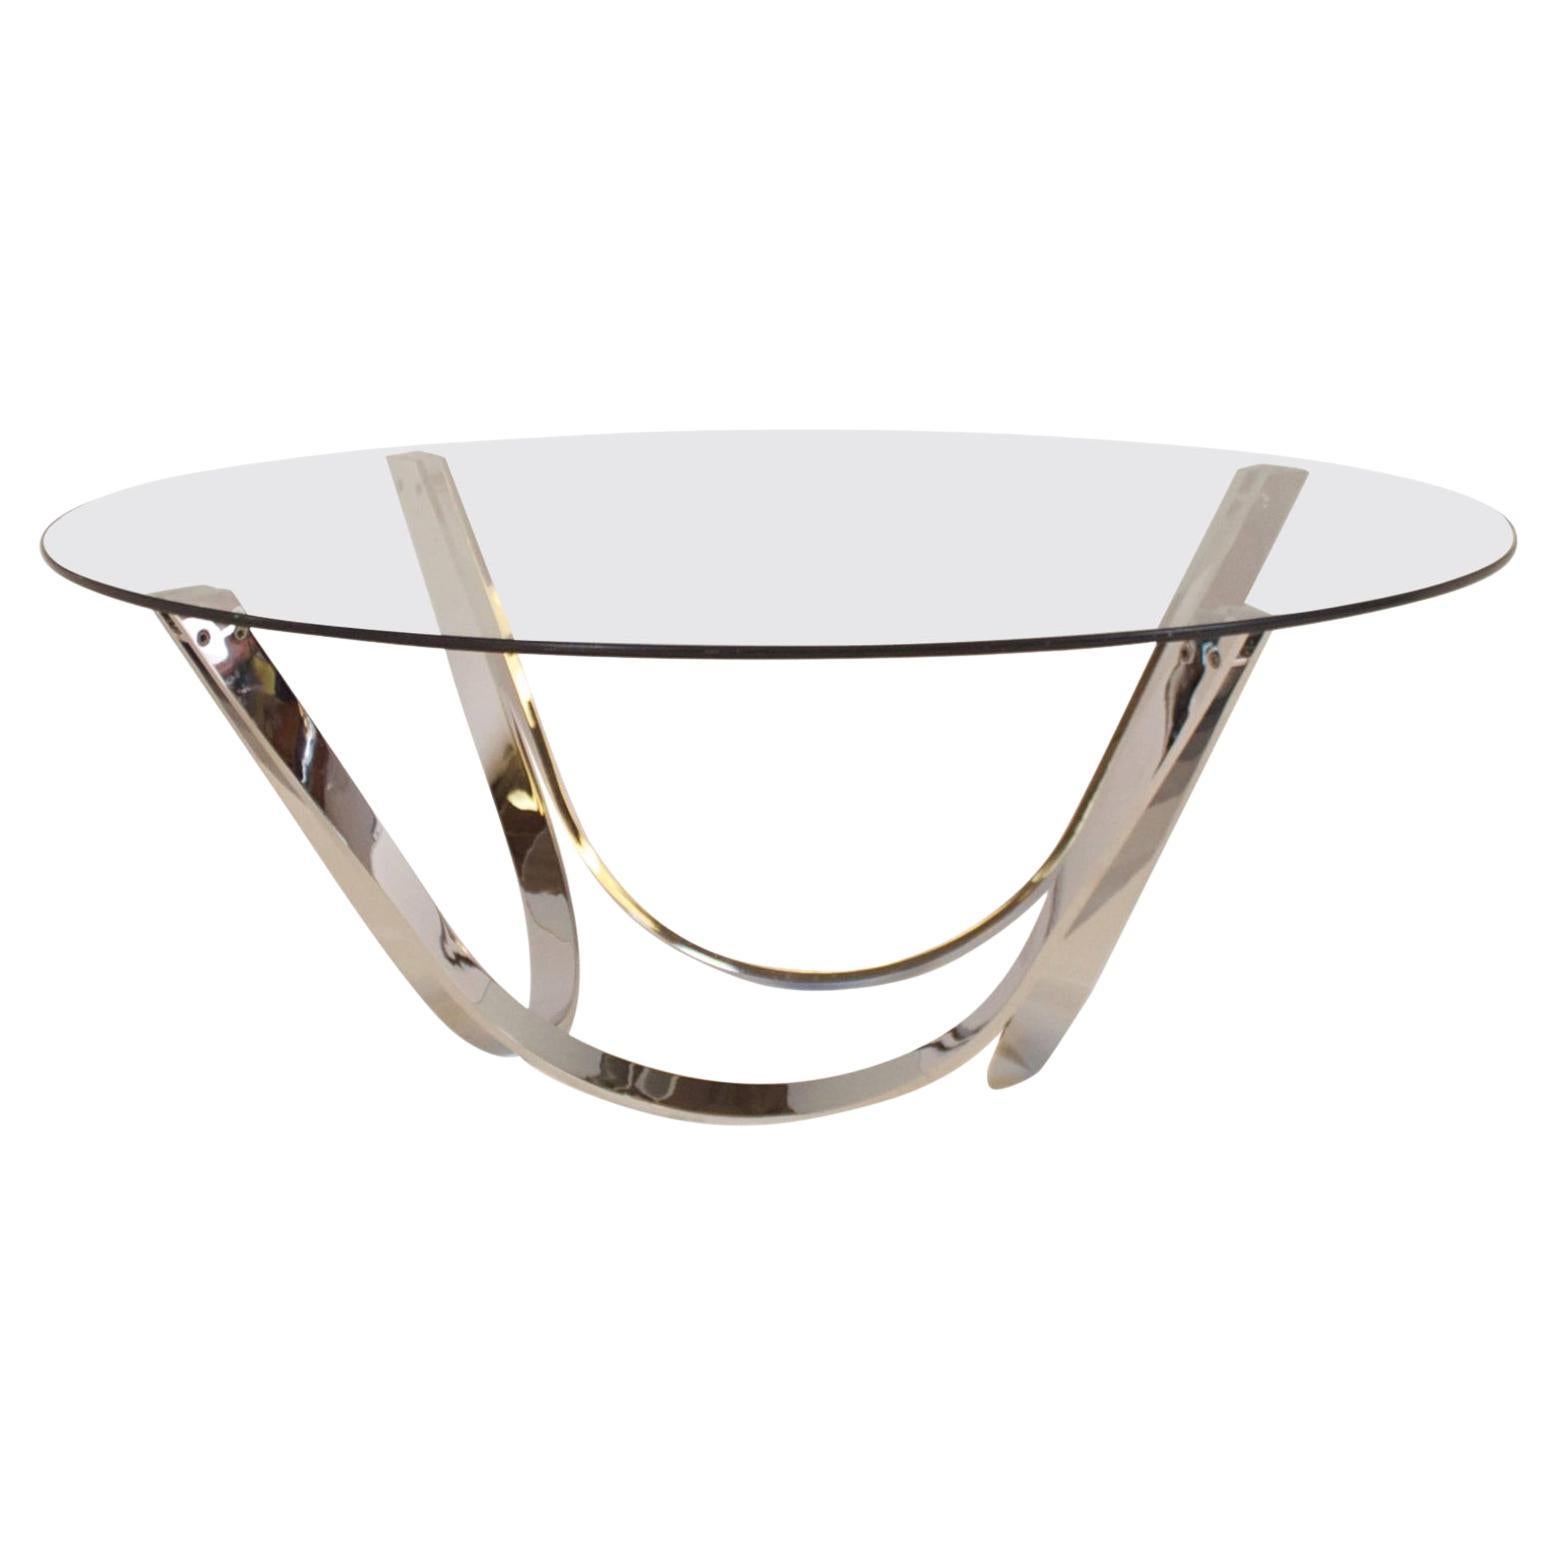 Roger Sprunger Tri-Mark Round Coffee Table with Nickel Legs and Glass Top For Sale